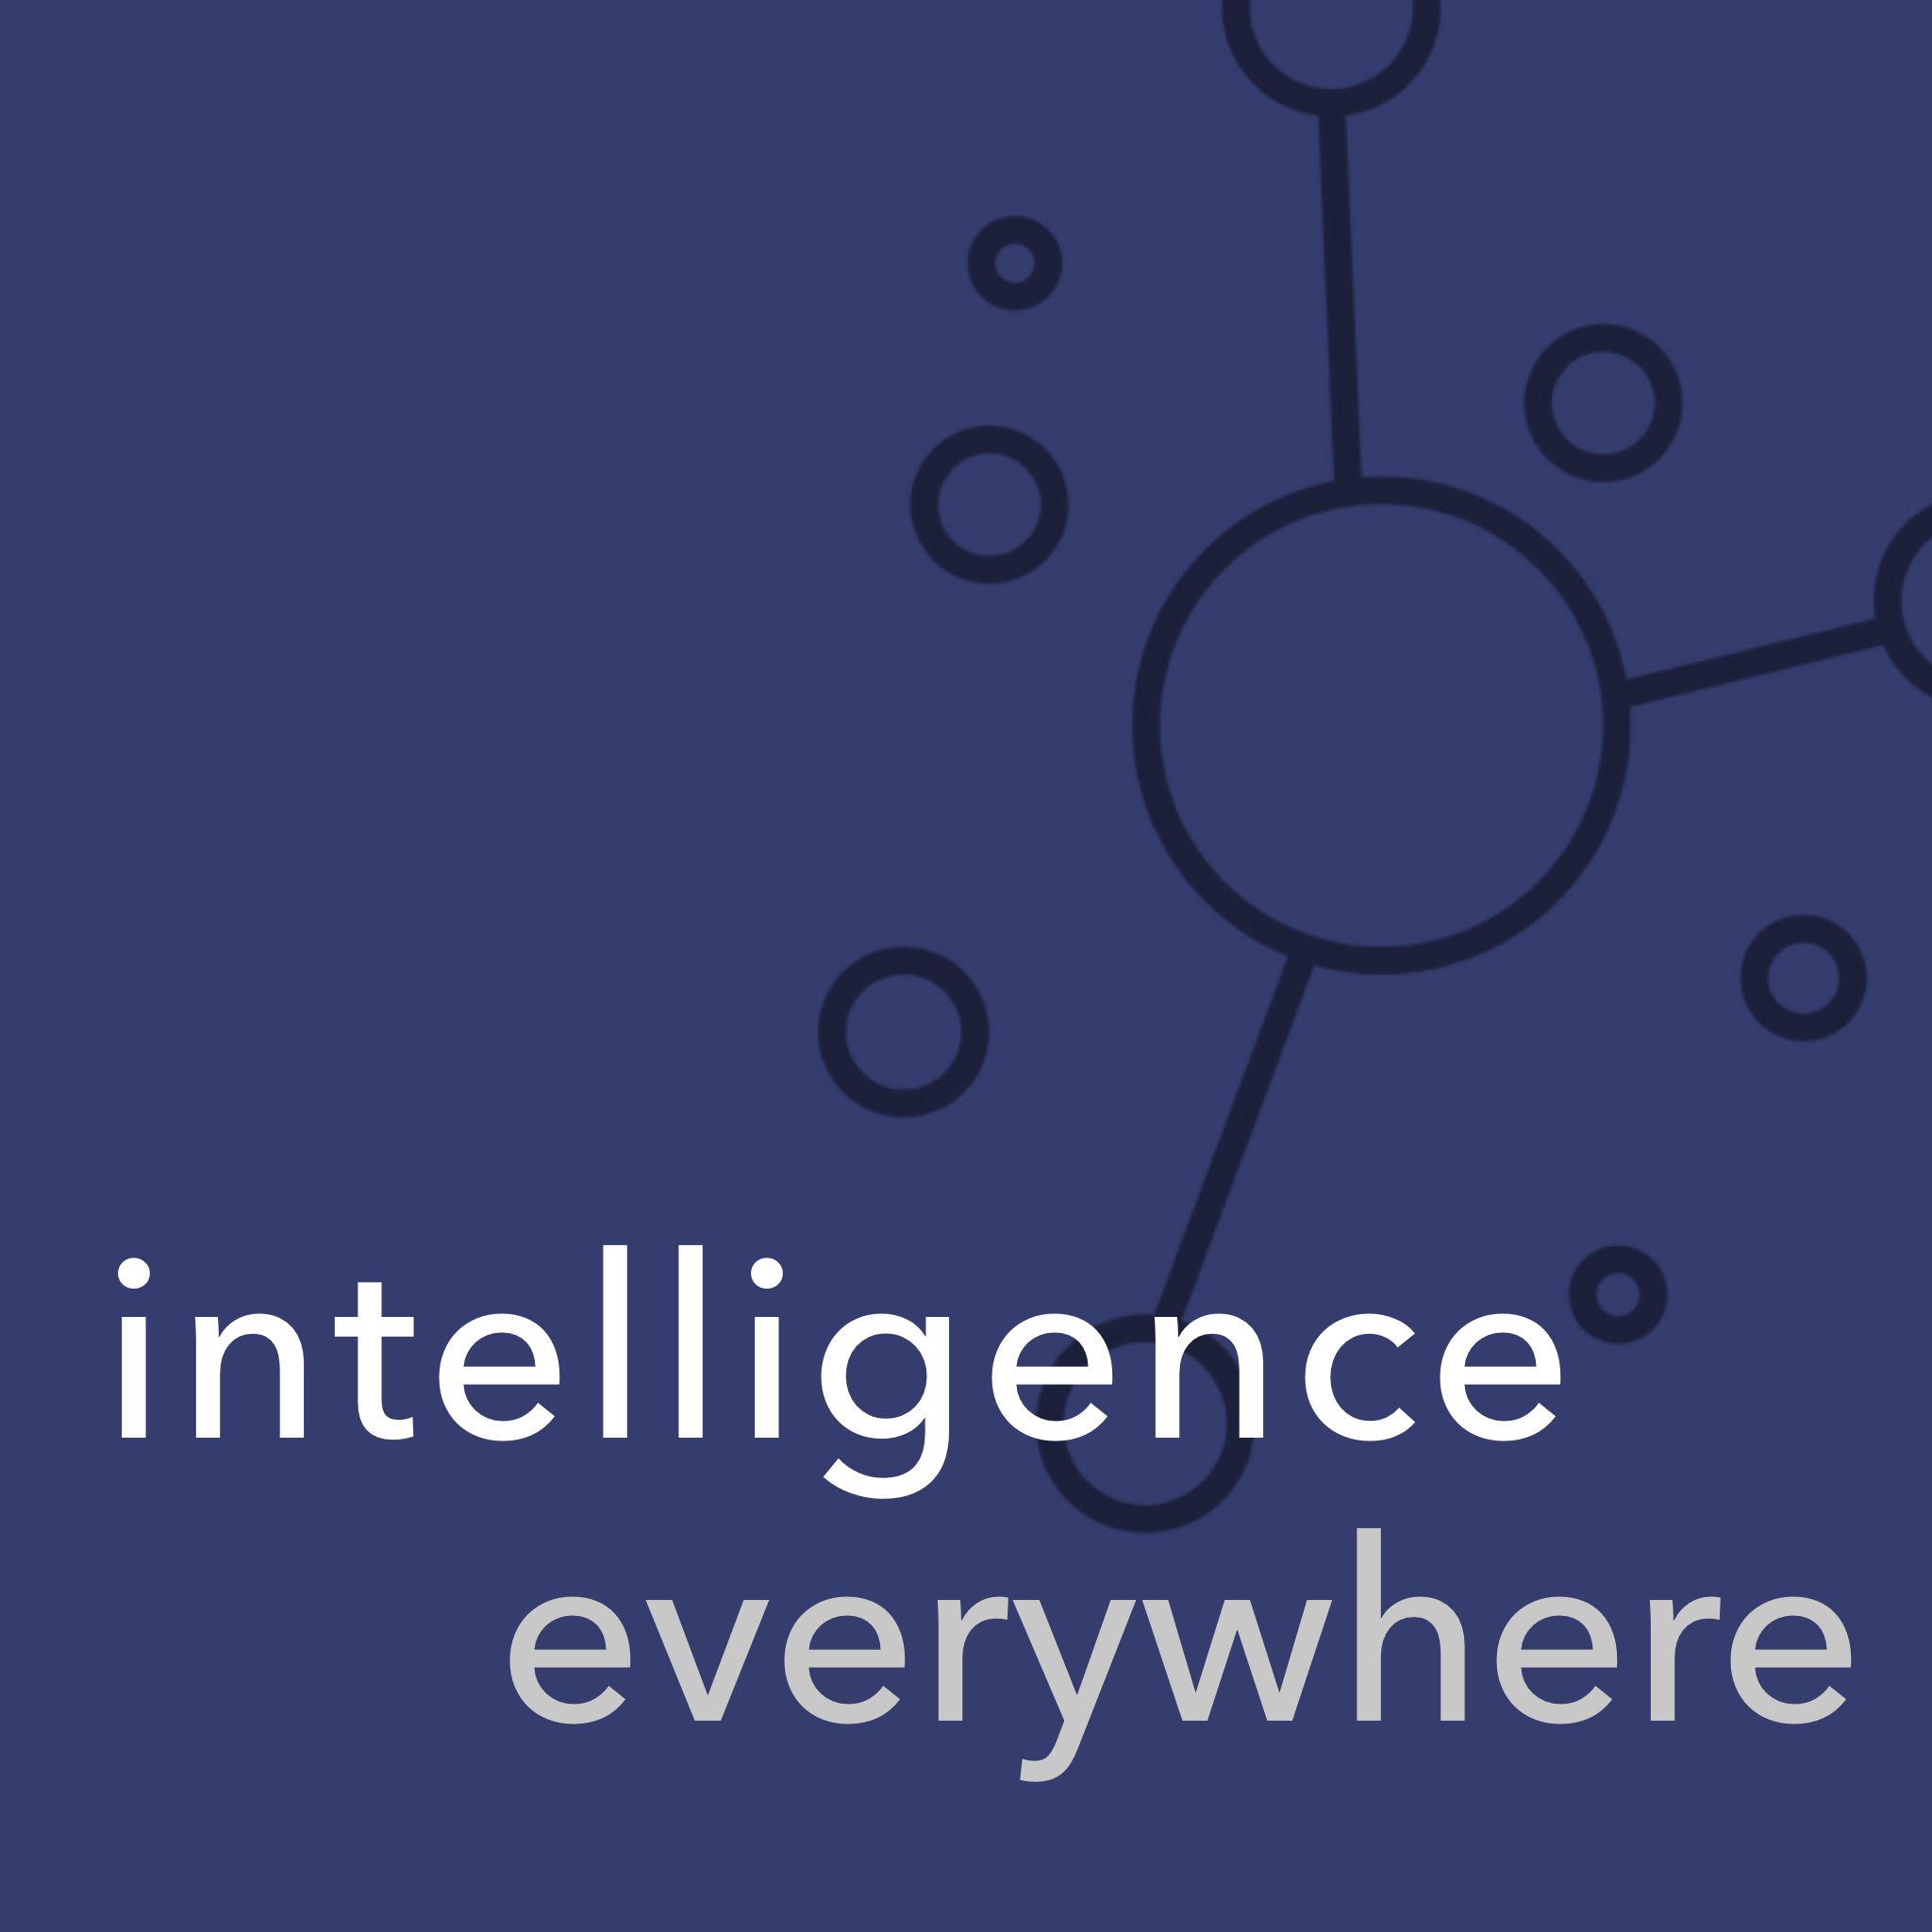 004 - Re-defining the "Intelligence" in Business Intelligence